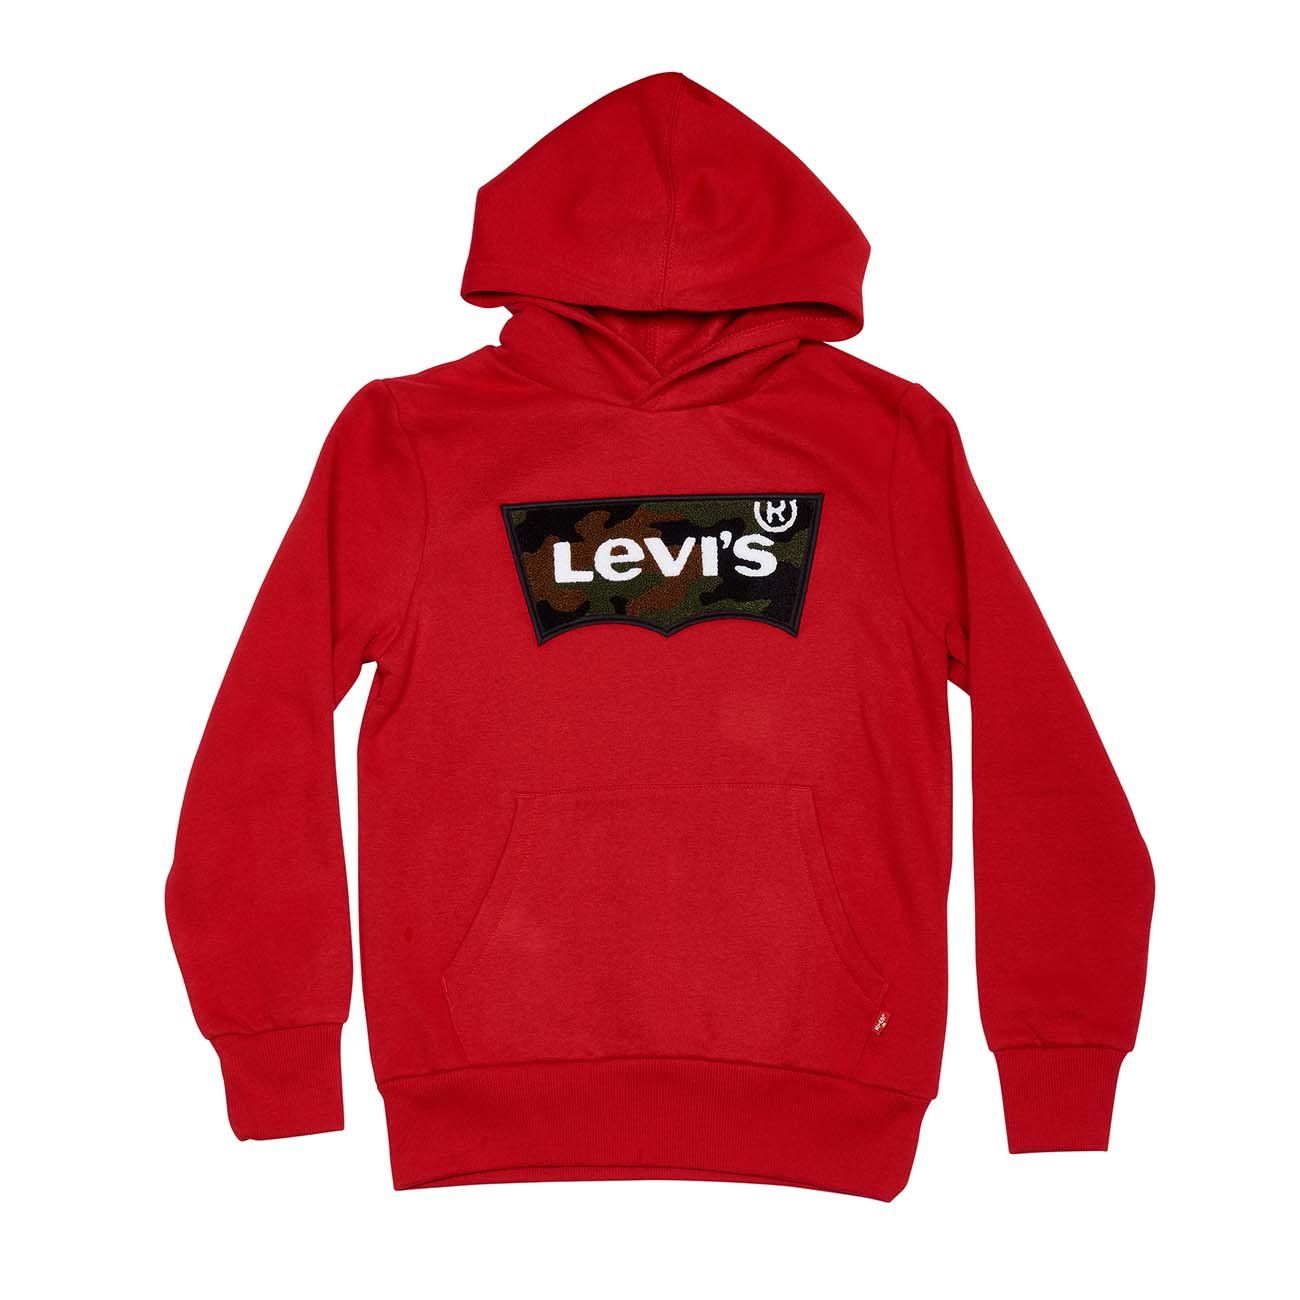 LEVIS CHENILLE HOODIE WITH BATWING LOGO Kid Chili pepper Camouflage |  Mascheroni Store